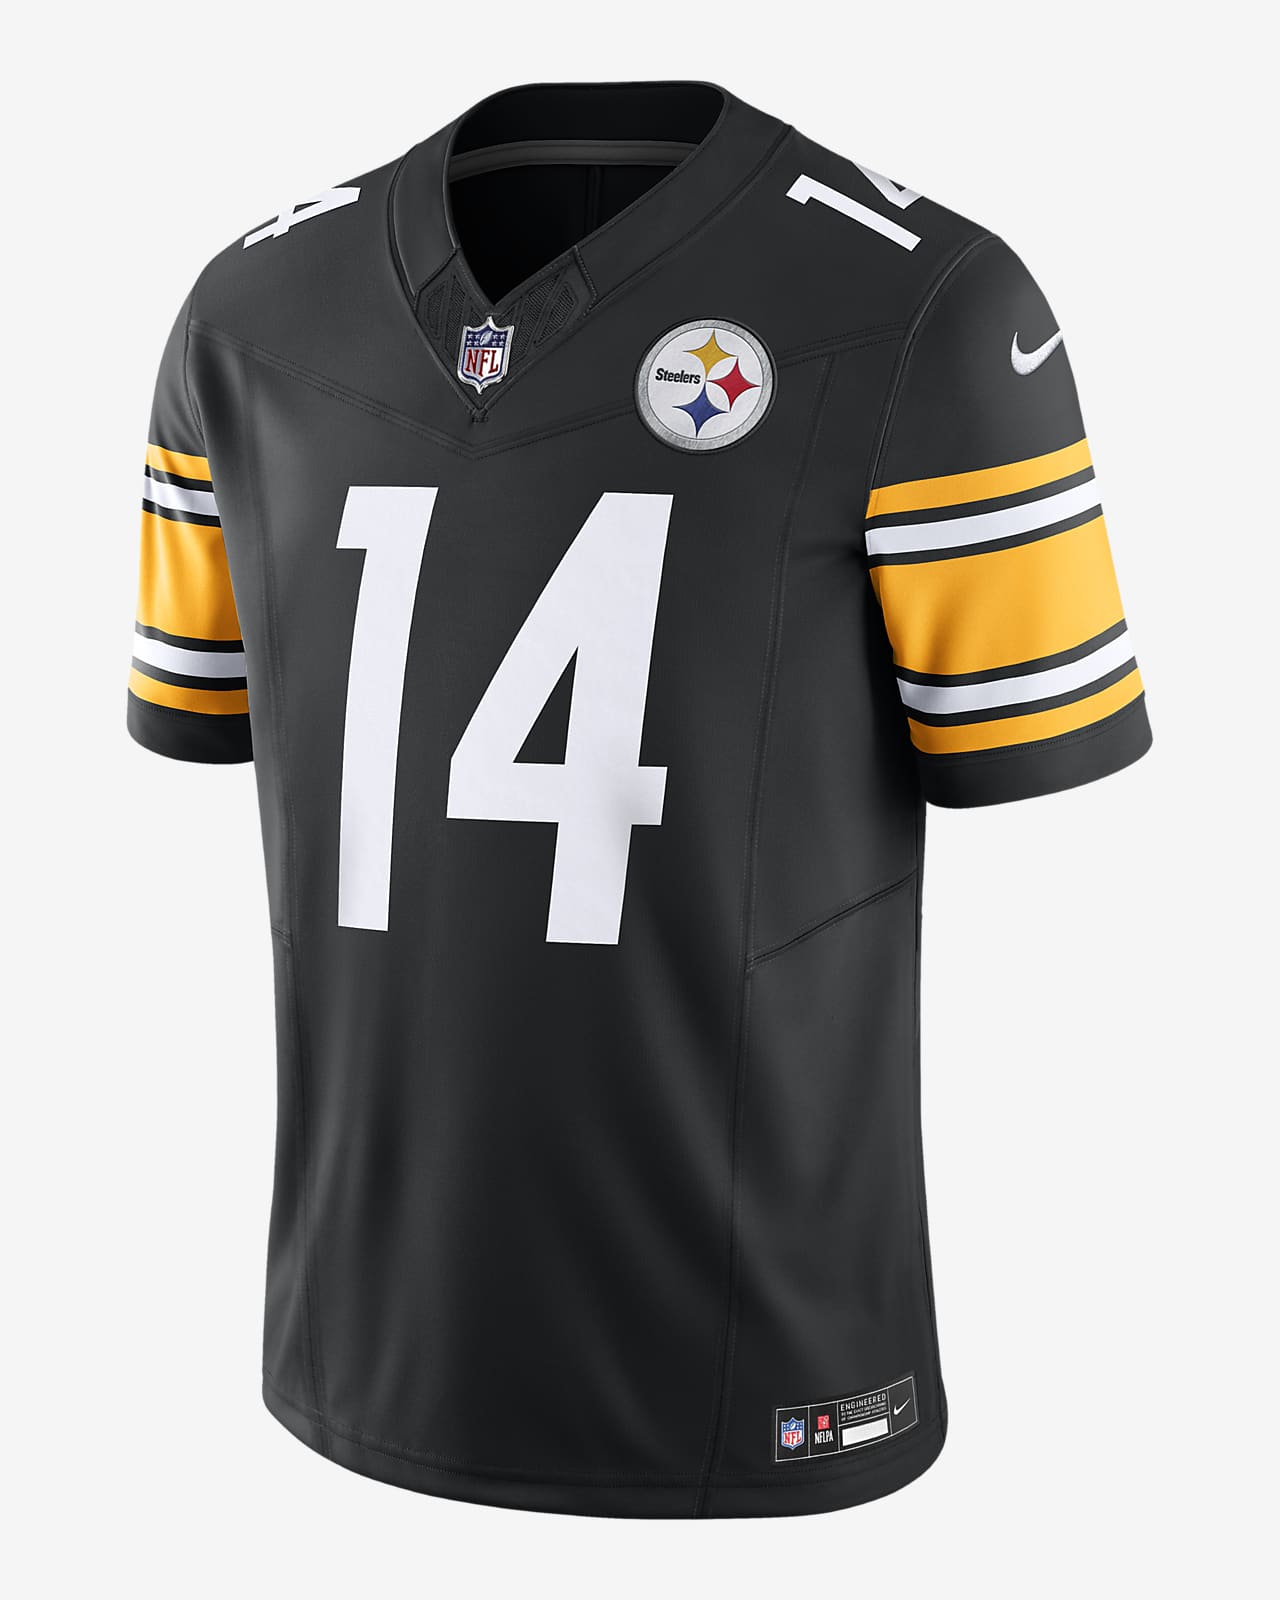 George Pickens Pittsburgh Steelers Men's Nike Dri-FIT NFL Limited Football Jersey